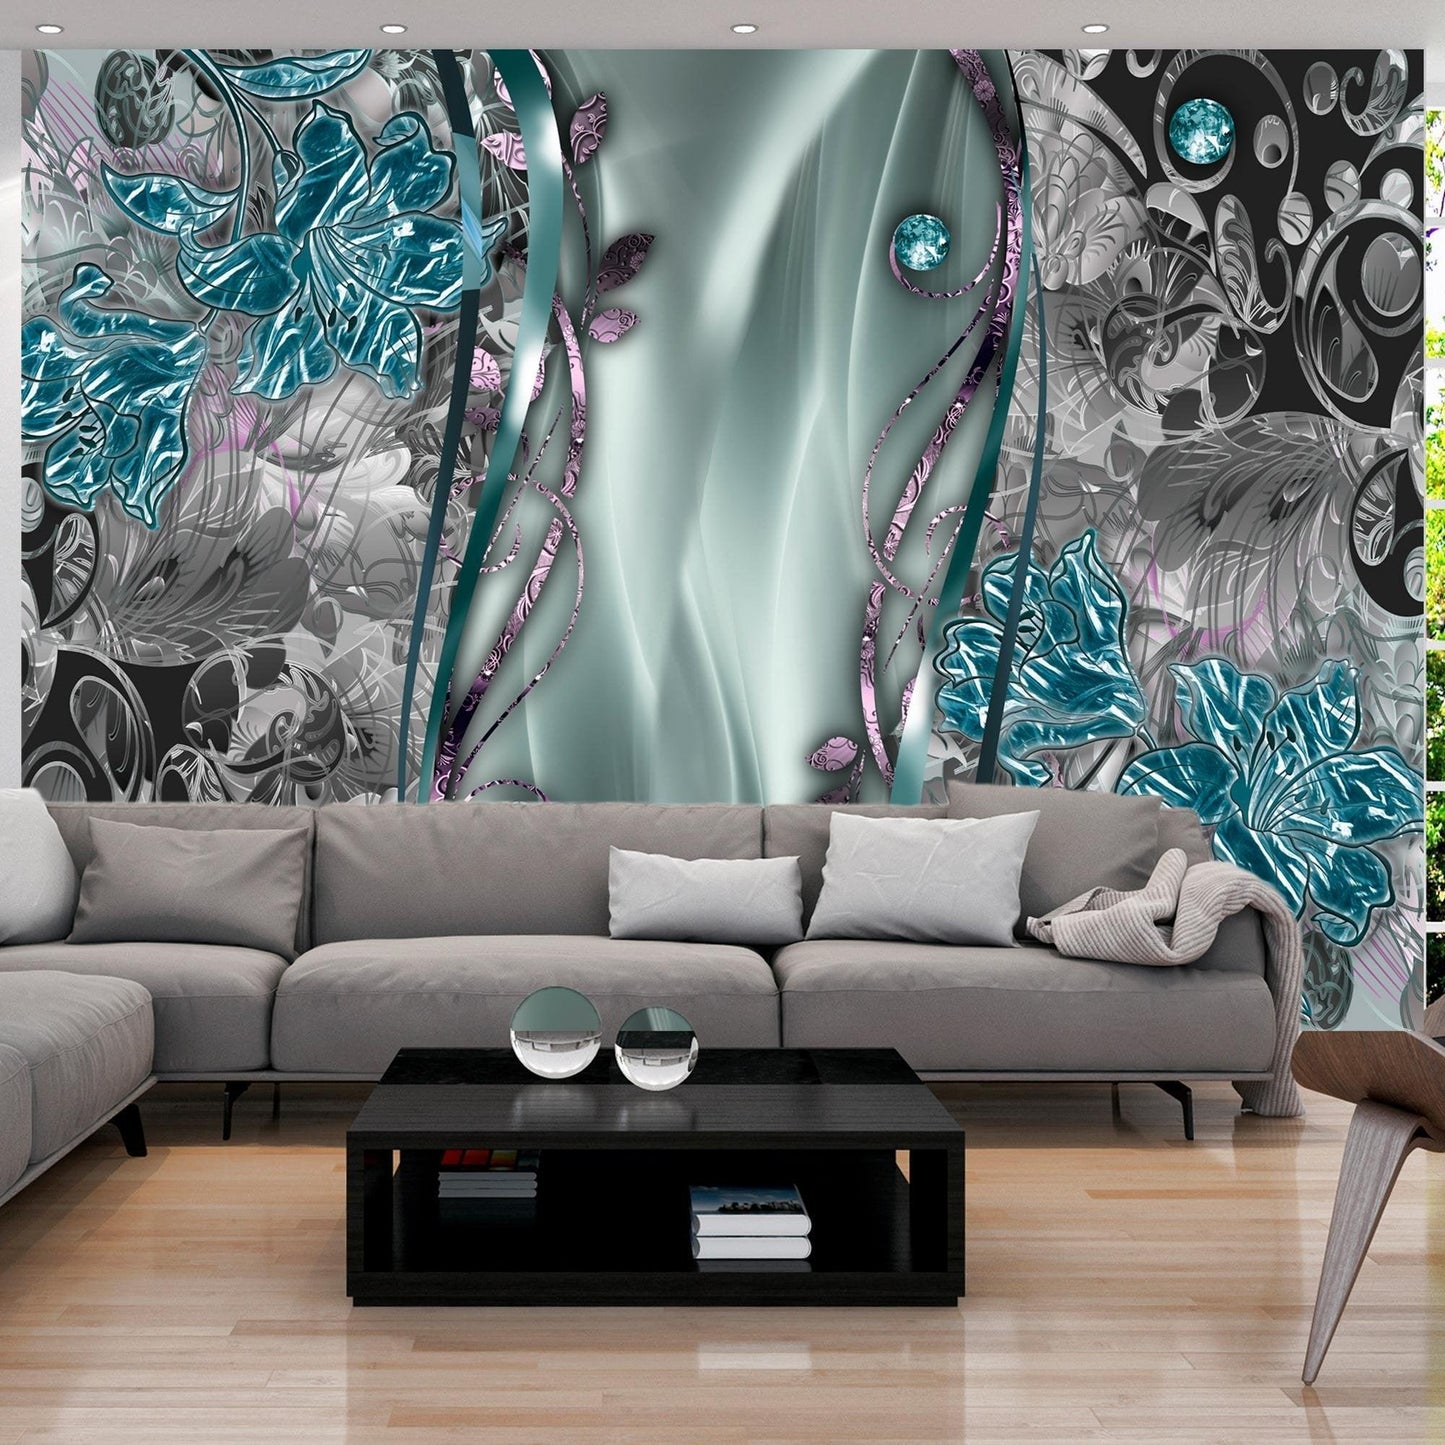 Peel and stick wall mural - Floral Curtain (Turquoise) - www.trendingbestsellers.com